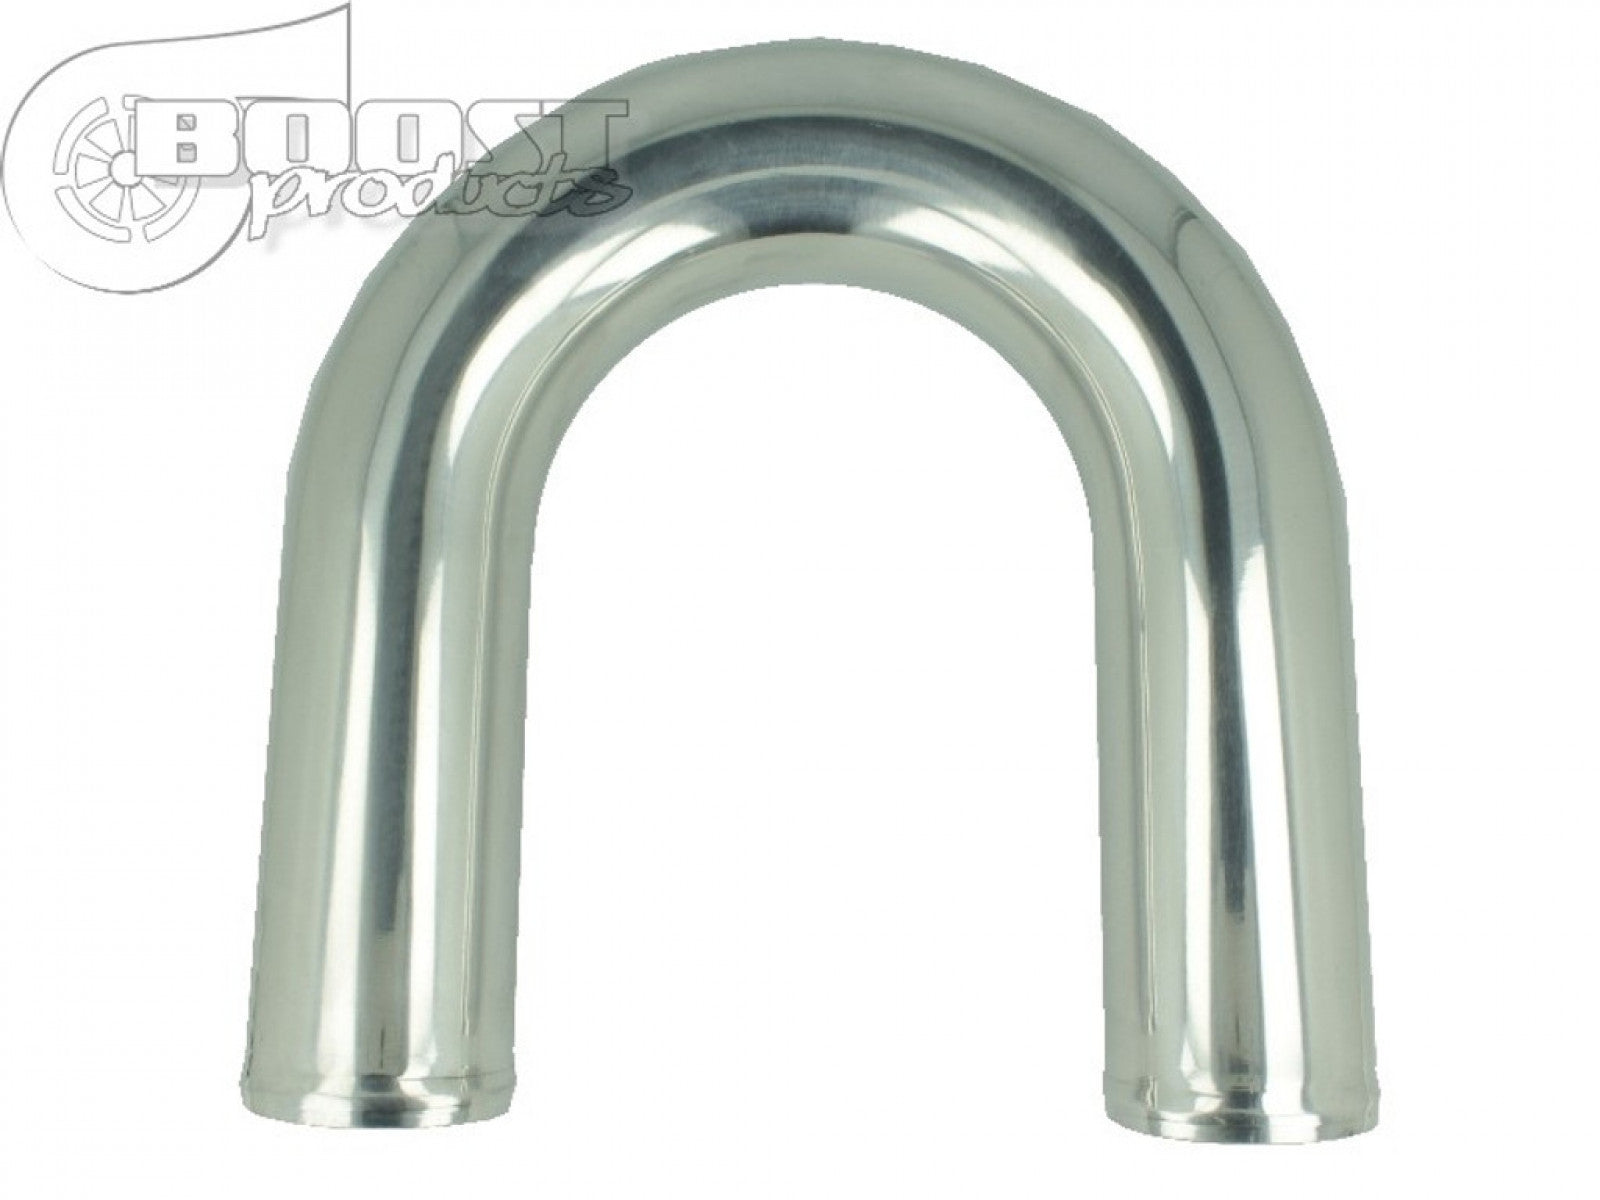 BOOST Products Aluminum Elbow 180 Degrees with 63mm (2-1/2") OD, Mandrel Bent, Polished